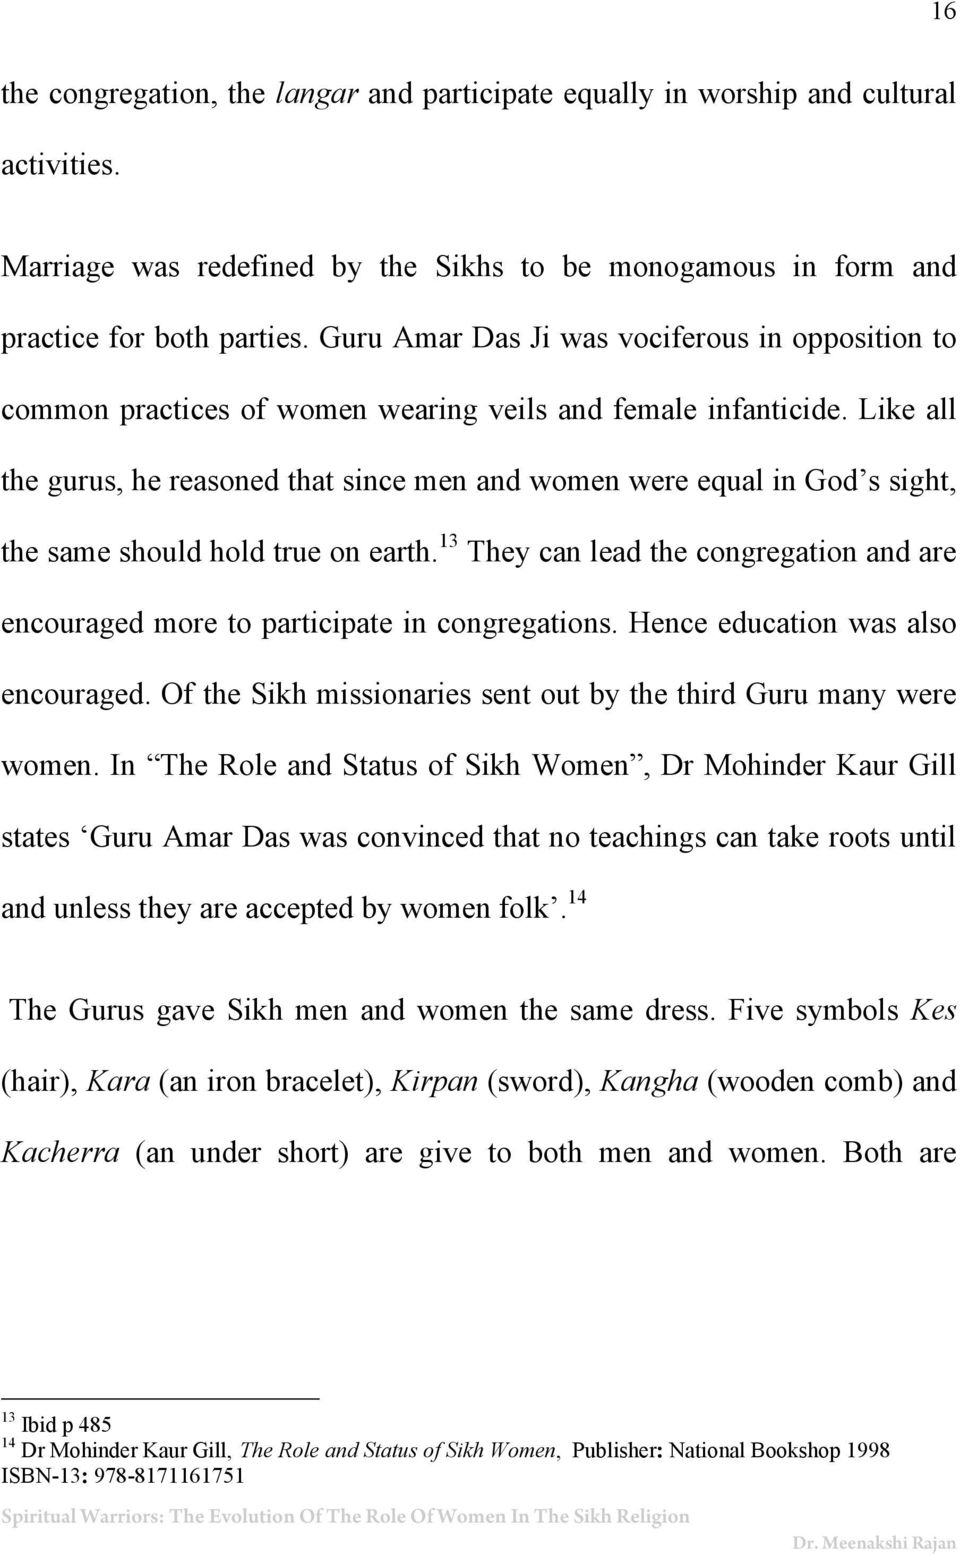 Spiritual Warriors The Evolution Of The Role Of Women In The Sikh Religion Pdf Free Download Trilochan singh is correct in saying that, the dasam granth guru gobind singh writes. docplayer net